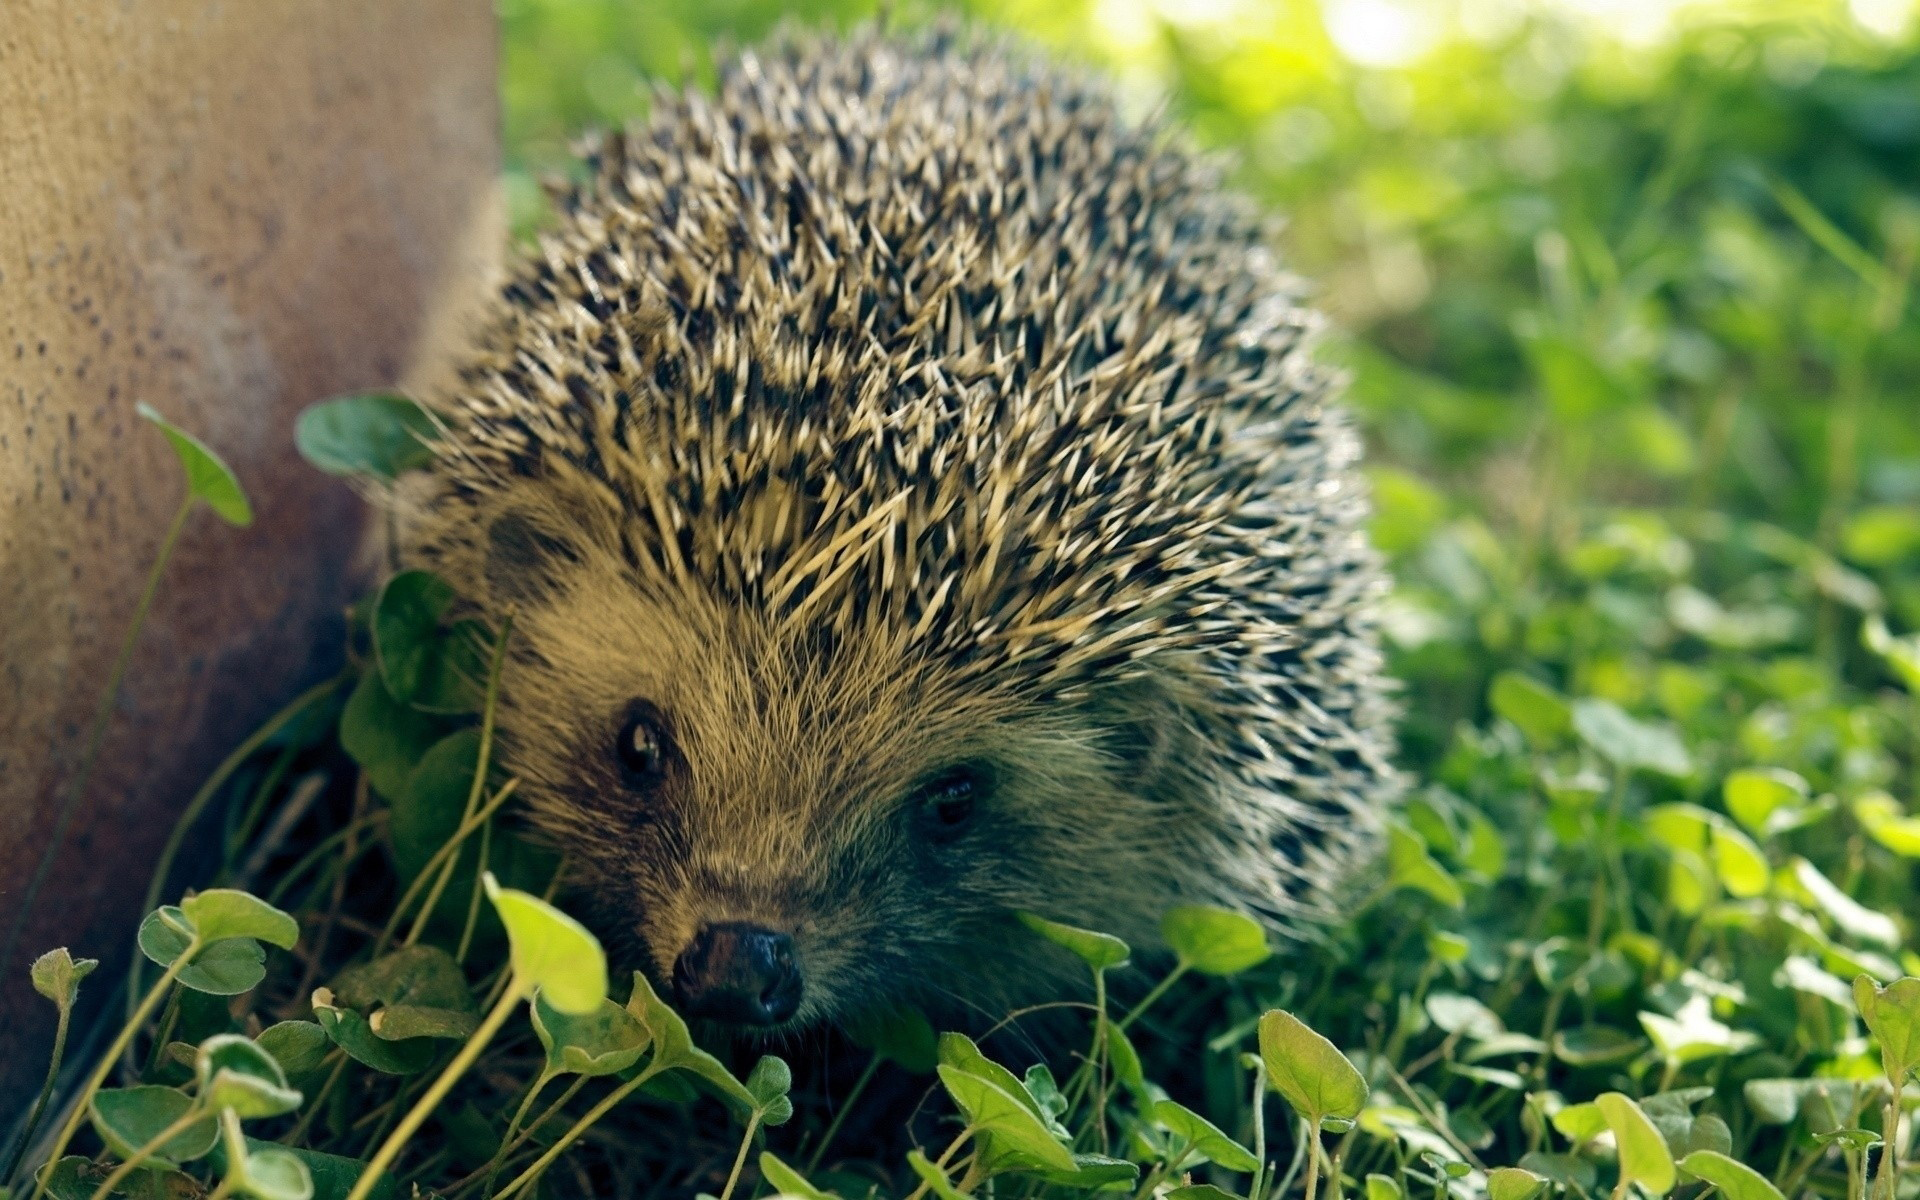 42435 download wallpaper animals, hedgehogs screensavers and pictures for free